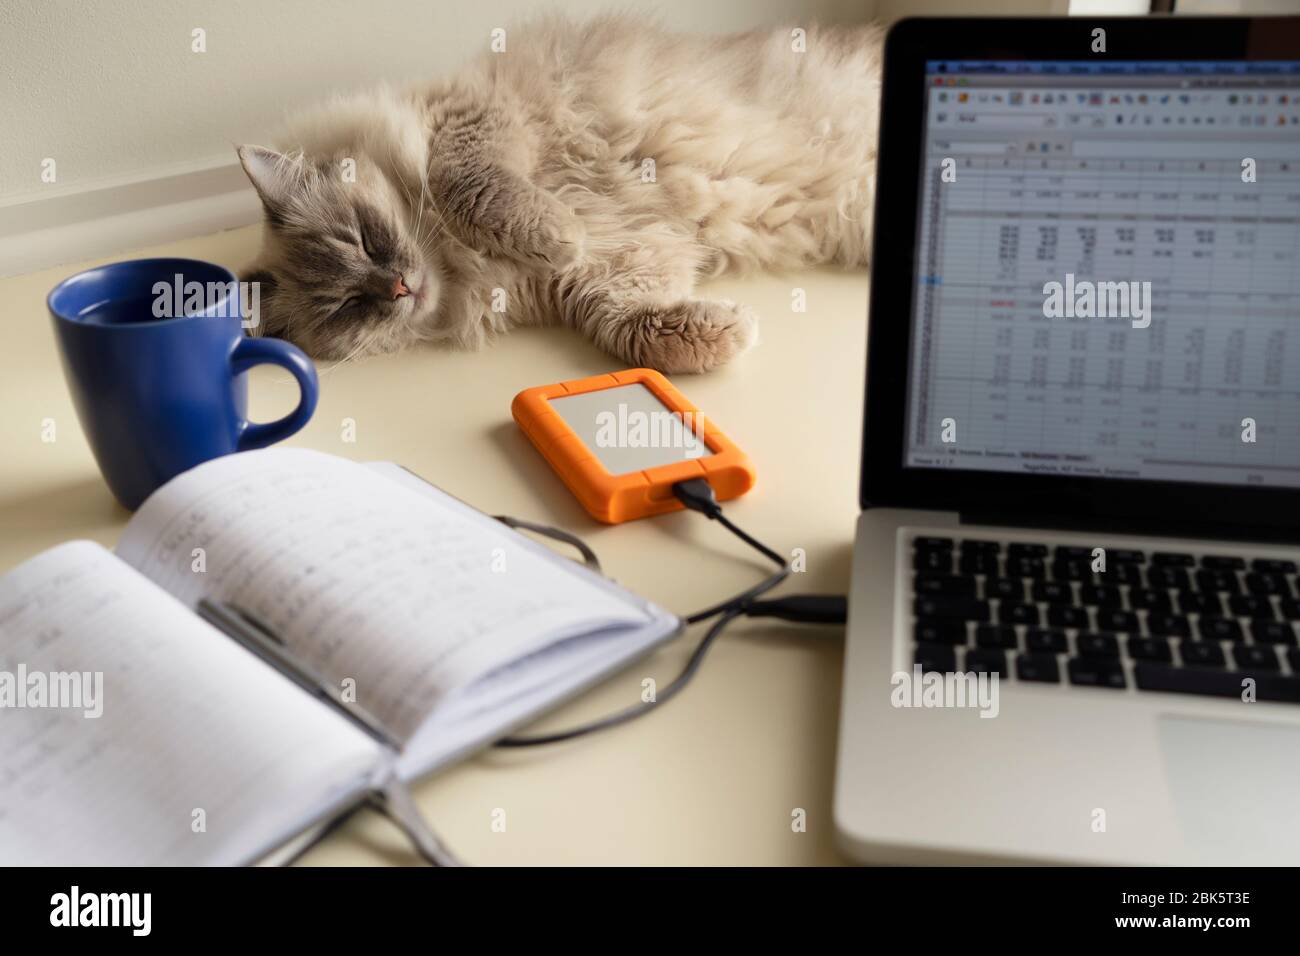 Cute pretty fluffy adult female lynx point ragdoll cat laying on a home office desk behind a laptop computer, portable hard drive and notebook. Stock Photo